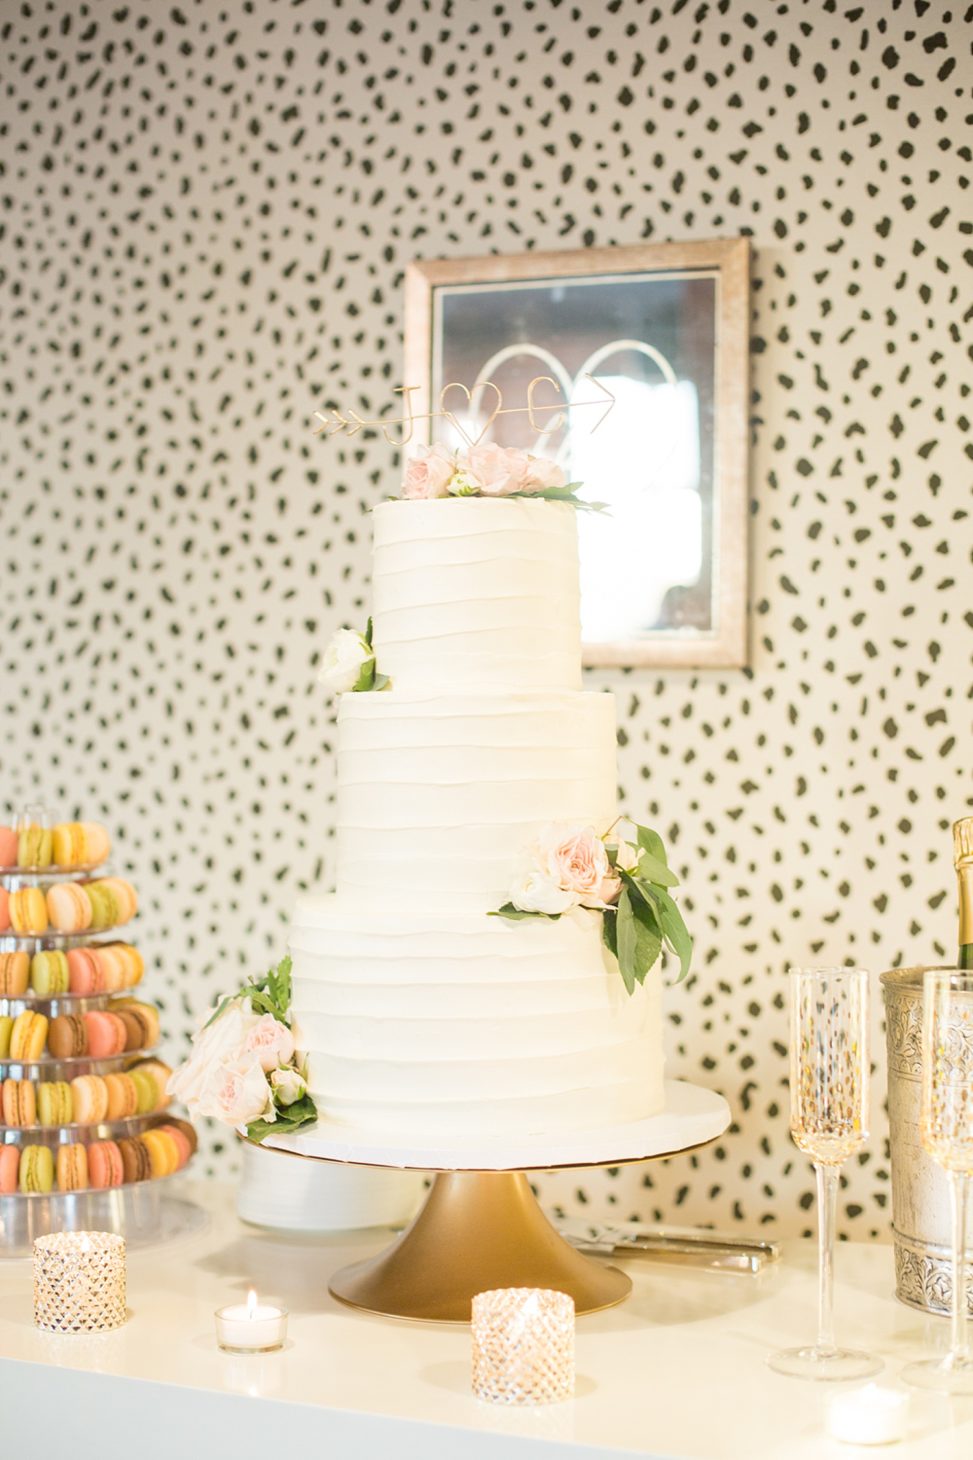 The wedding cake was a buttercream one, with blush and ivory blooms and an arrow topper